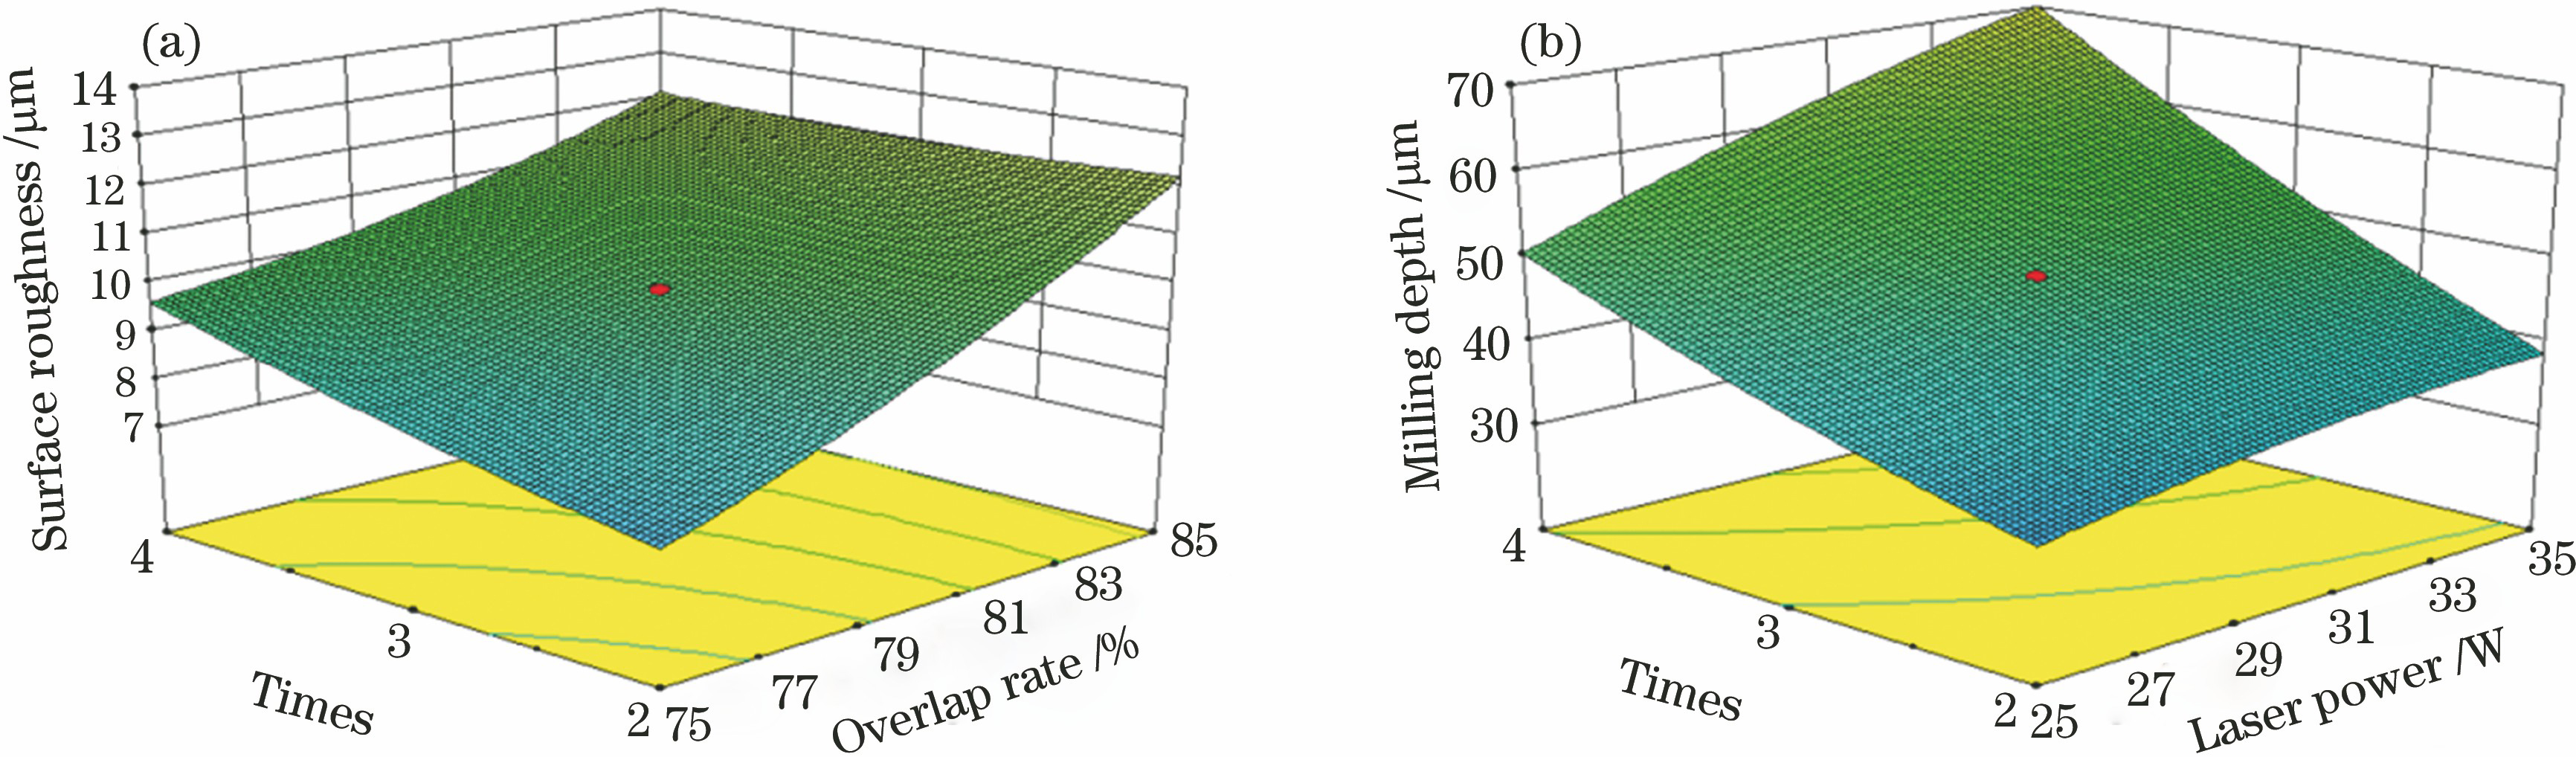 Interactive effects of process parameters on milling quality. (a) Effect on surface roughness; (b) effect on milling depth